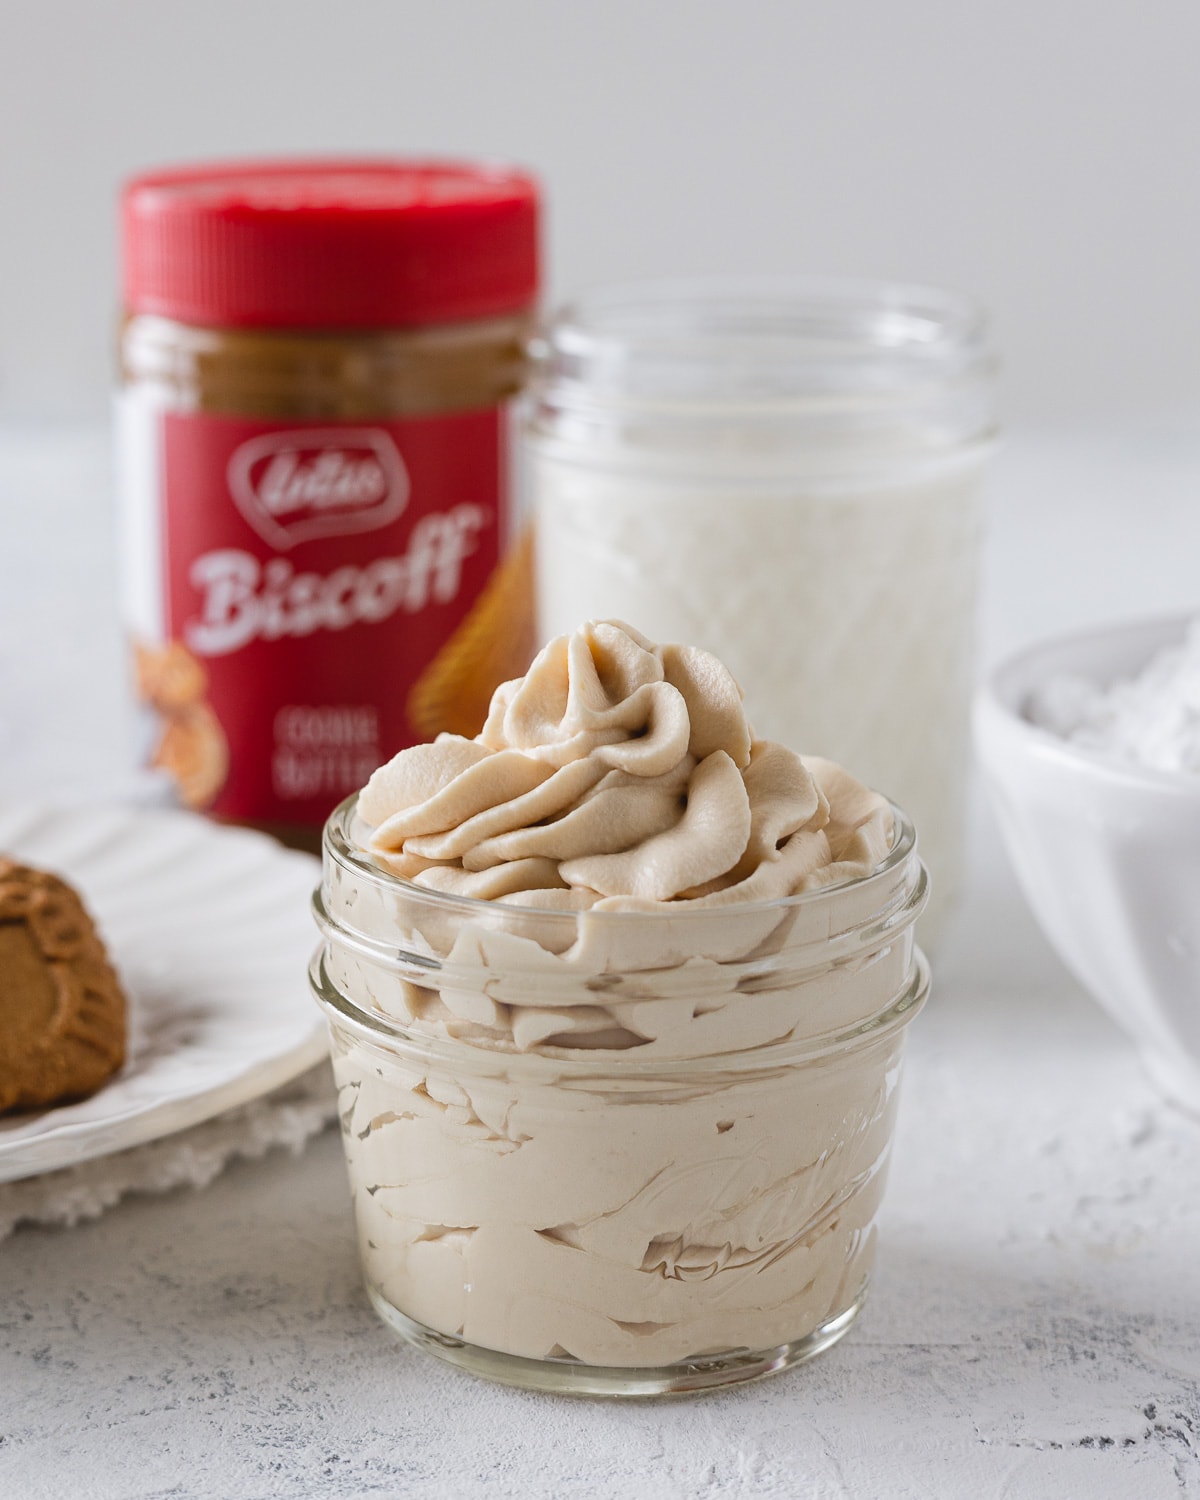 Whipped cream made with Biscoff spread and piped into a small glass jar.